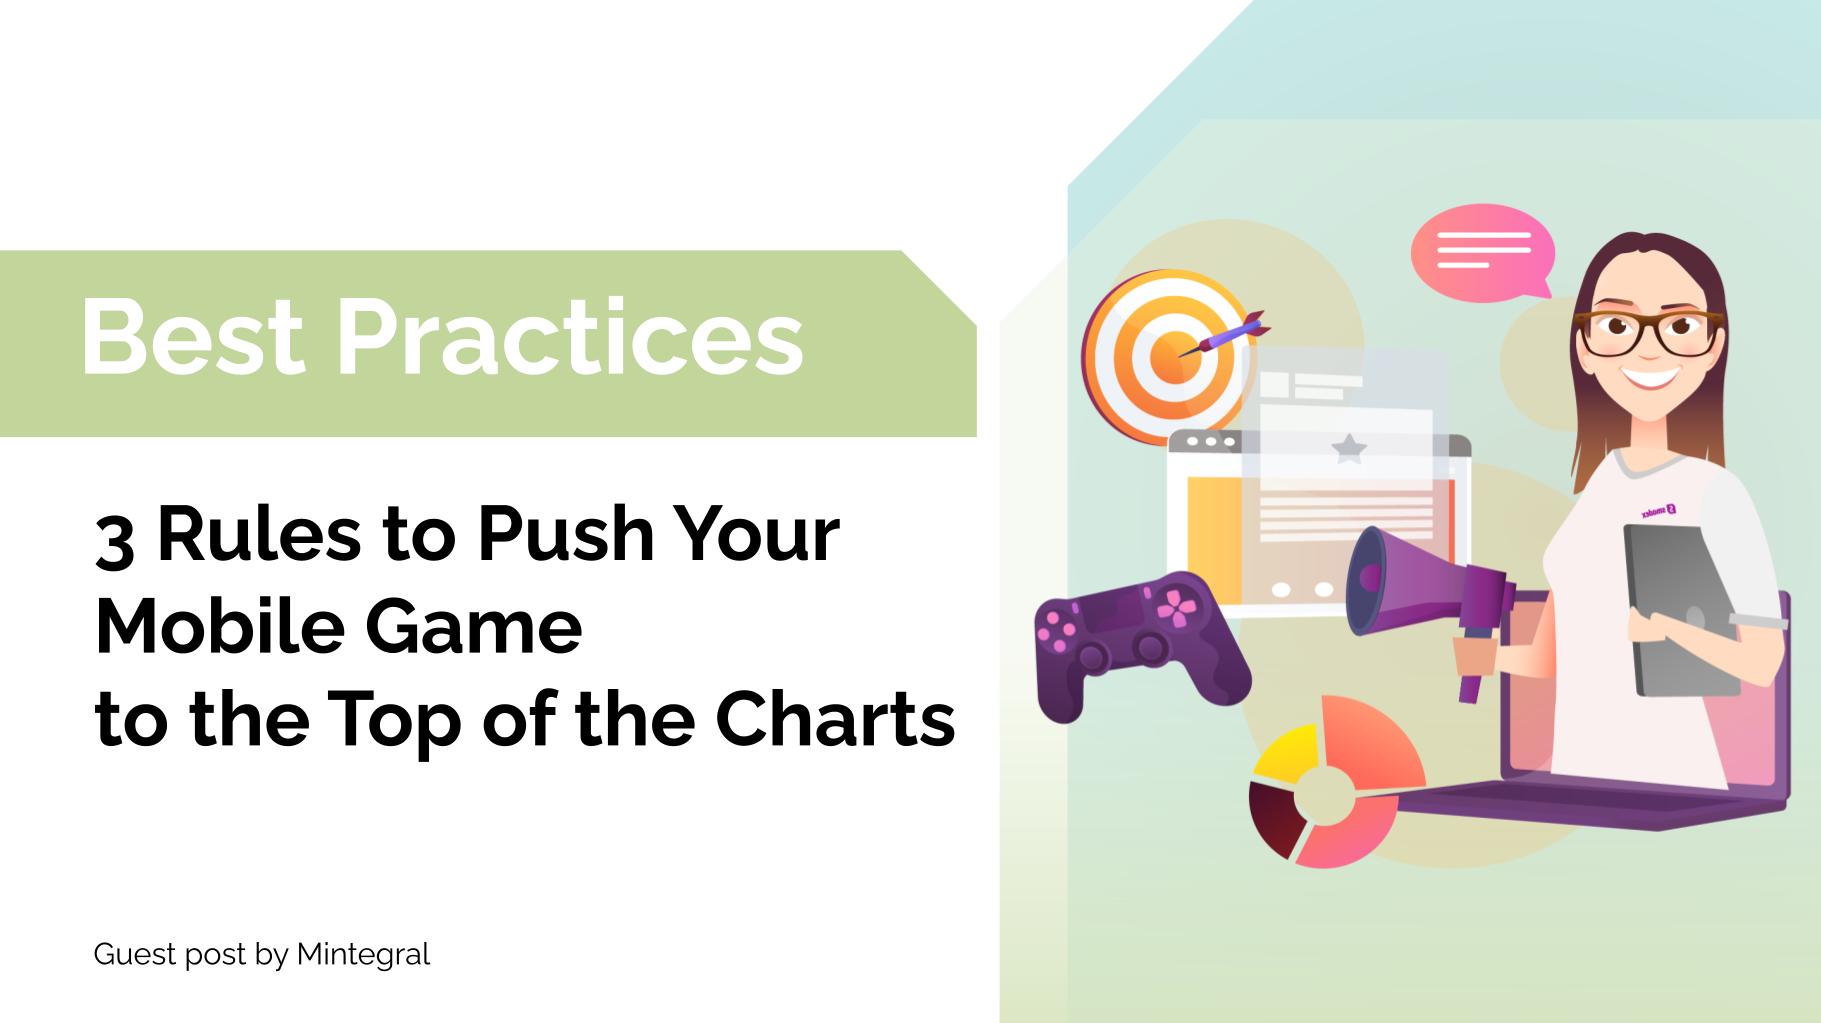 3 rules to push your mobile game to the top of the charts